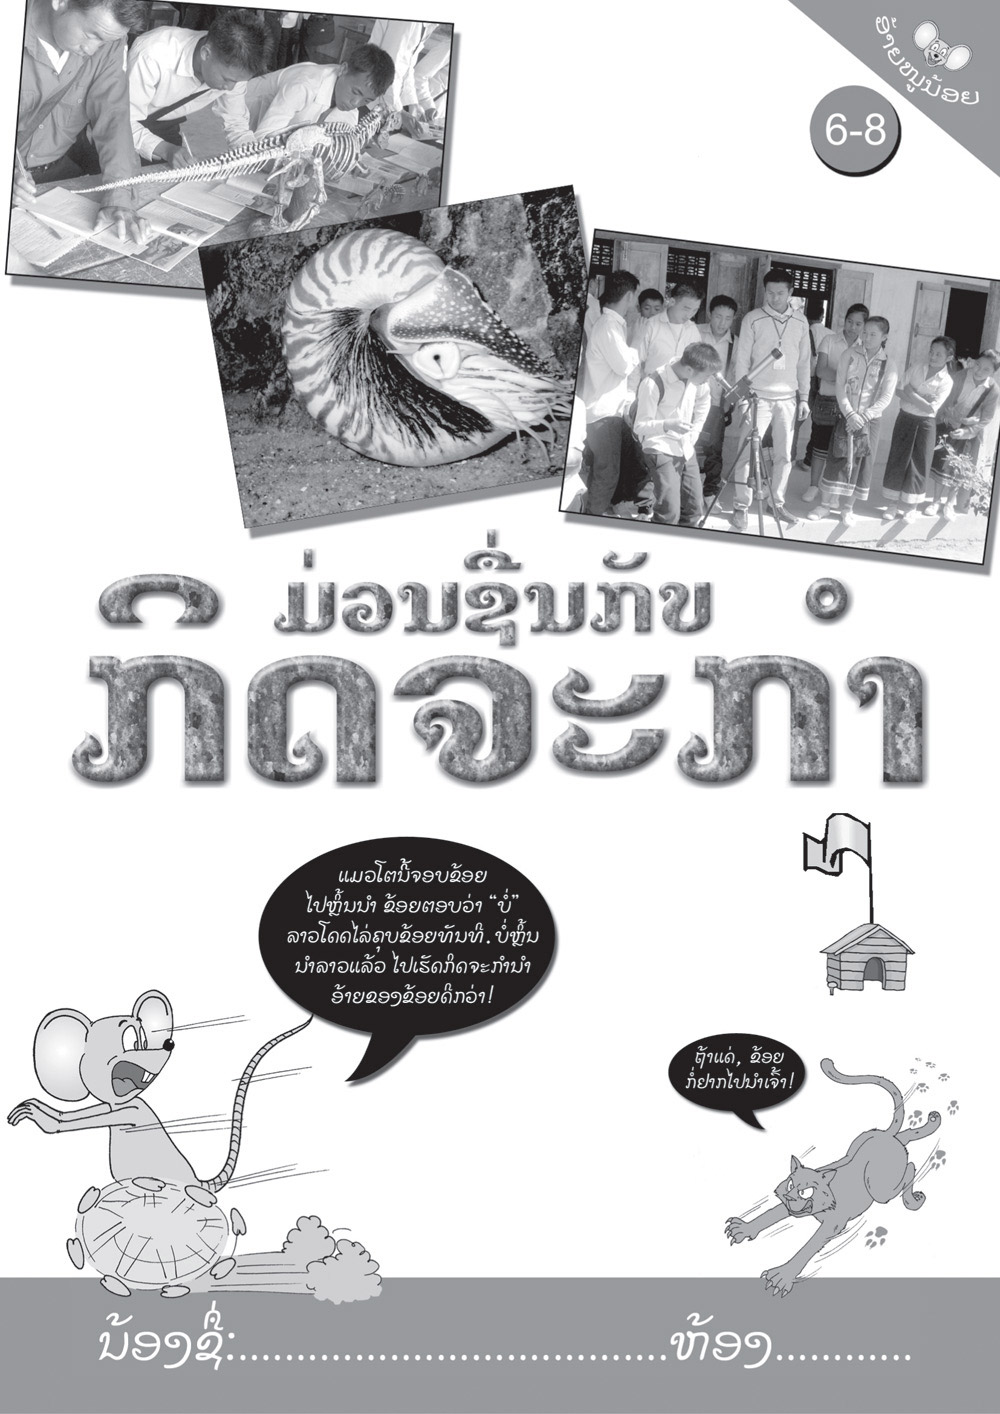 Discovery Day Book Grades 6-8 large book cover, published in Lao language